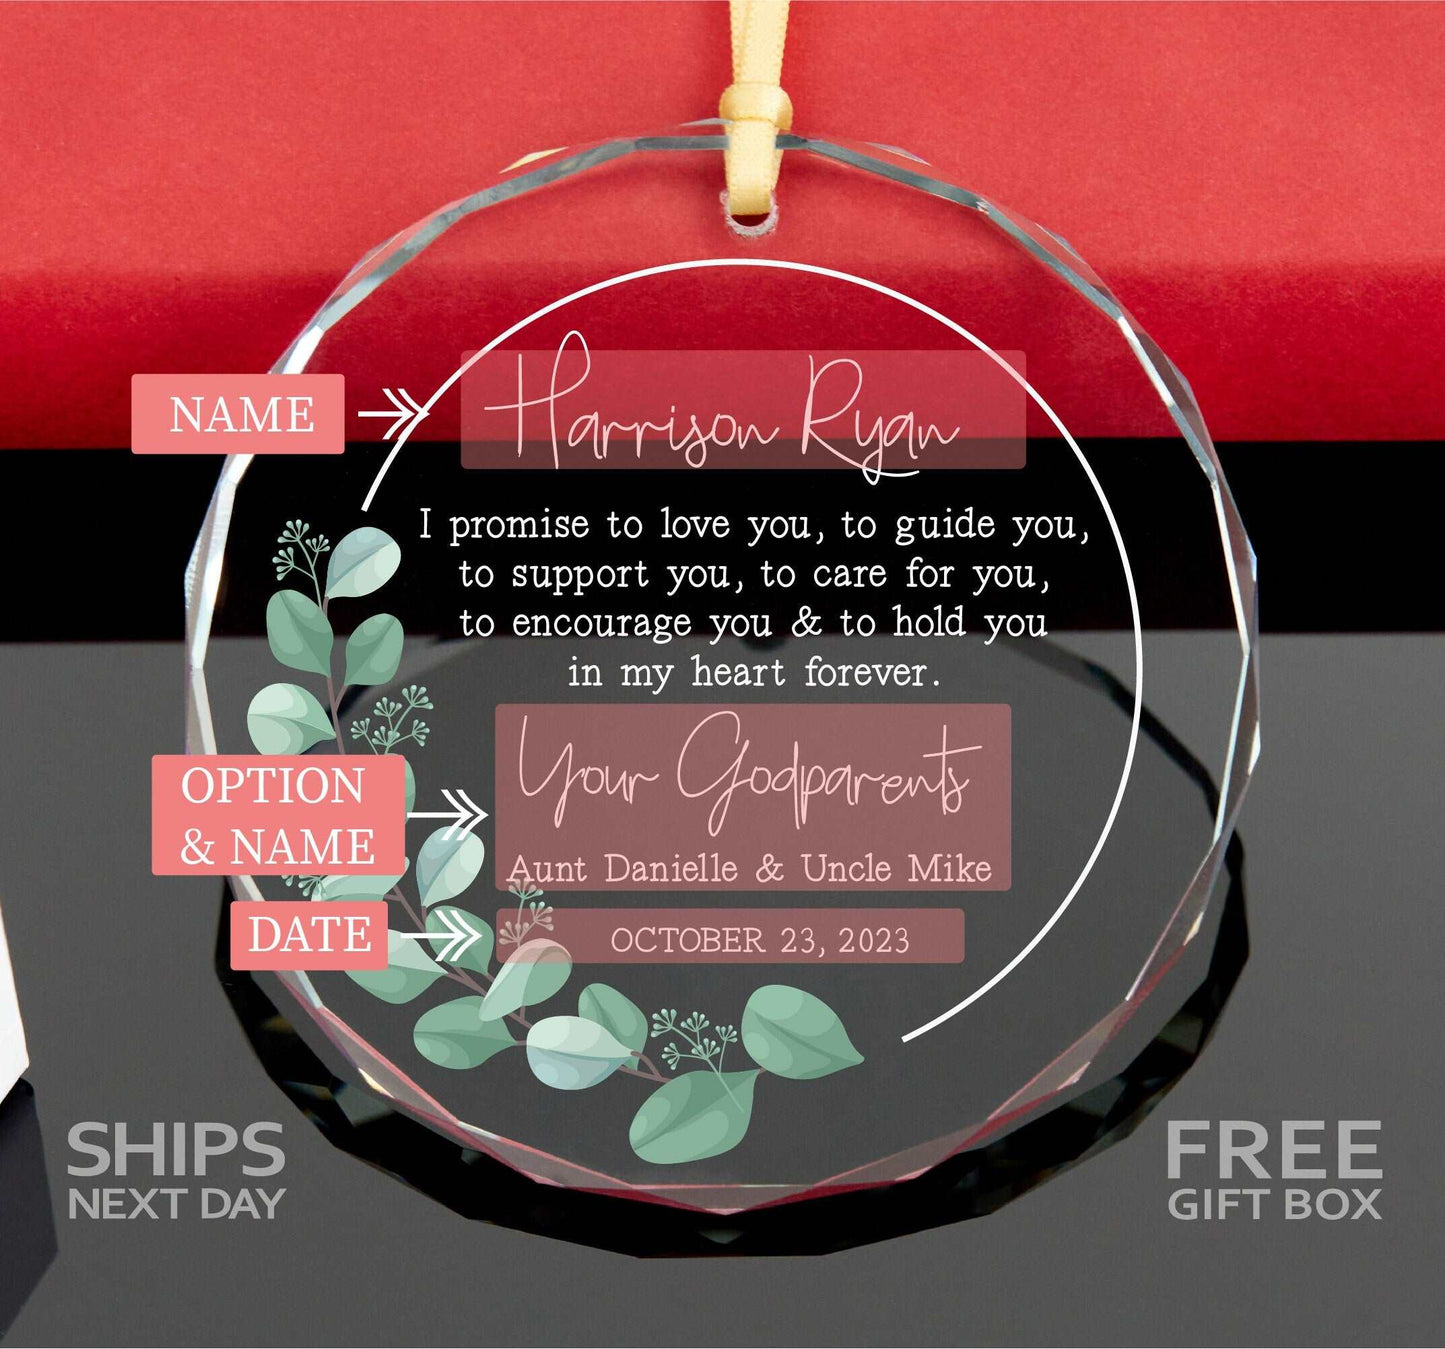 a personalized glass ornament with a message on it